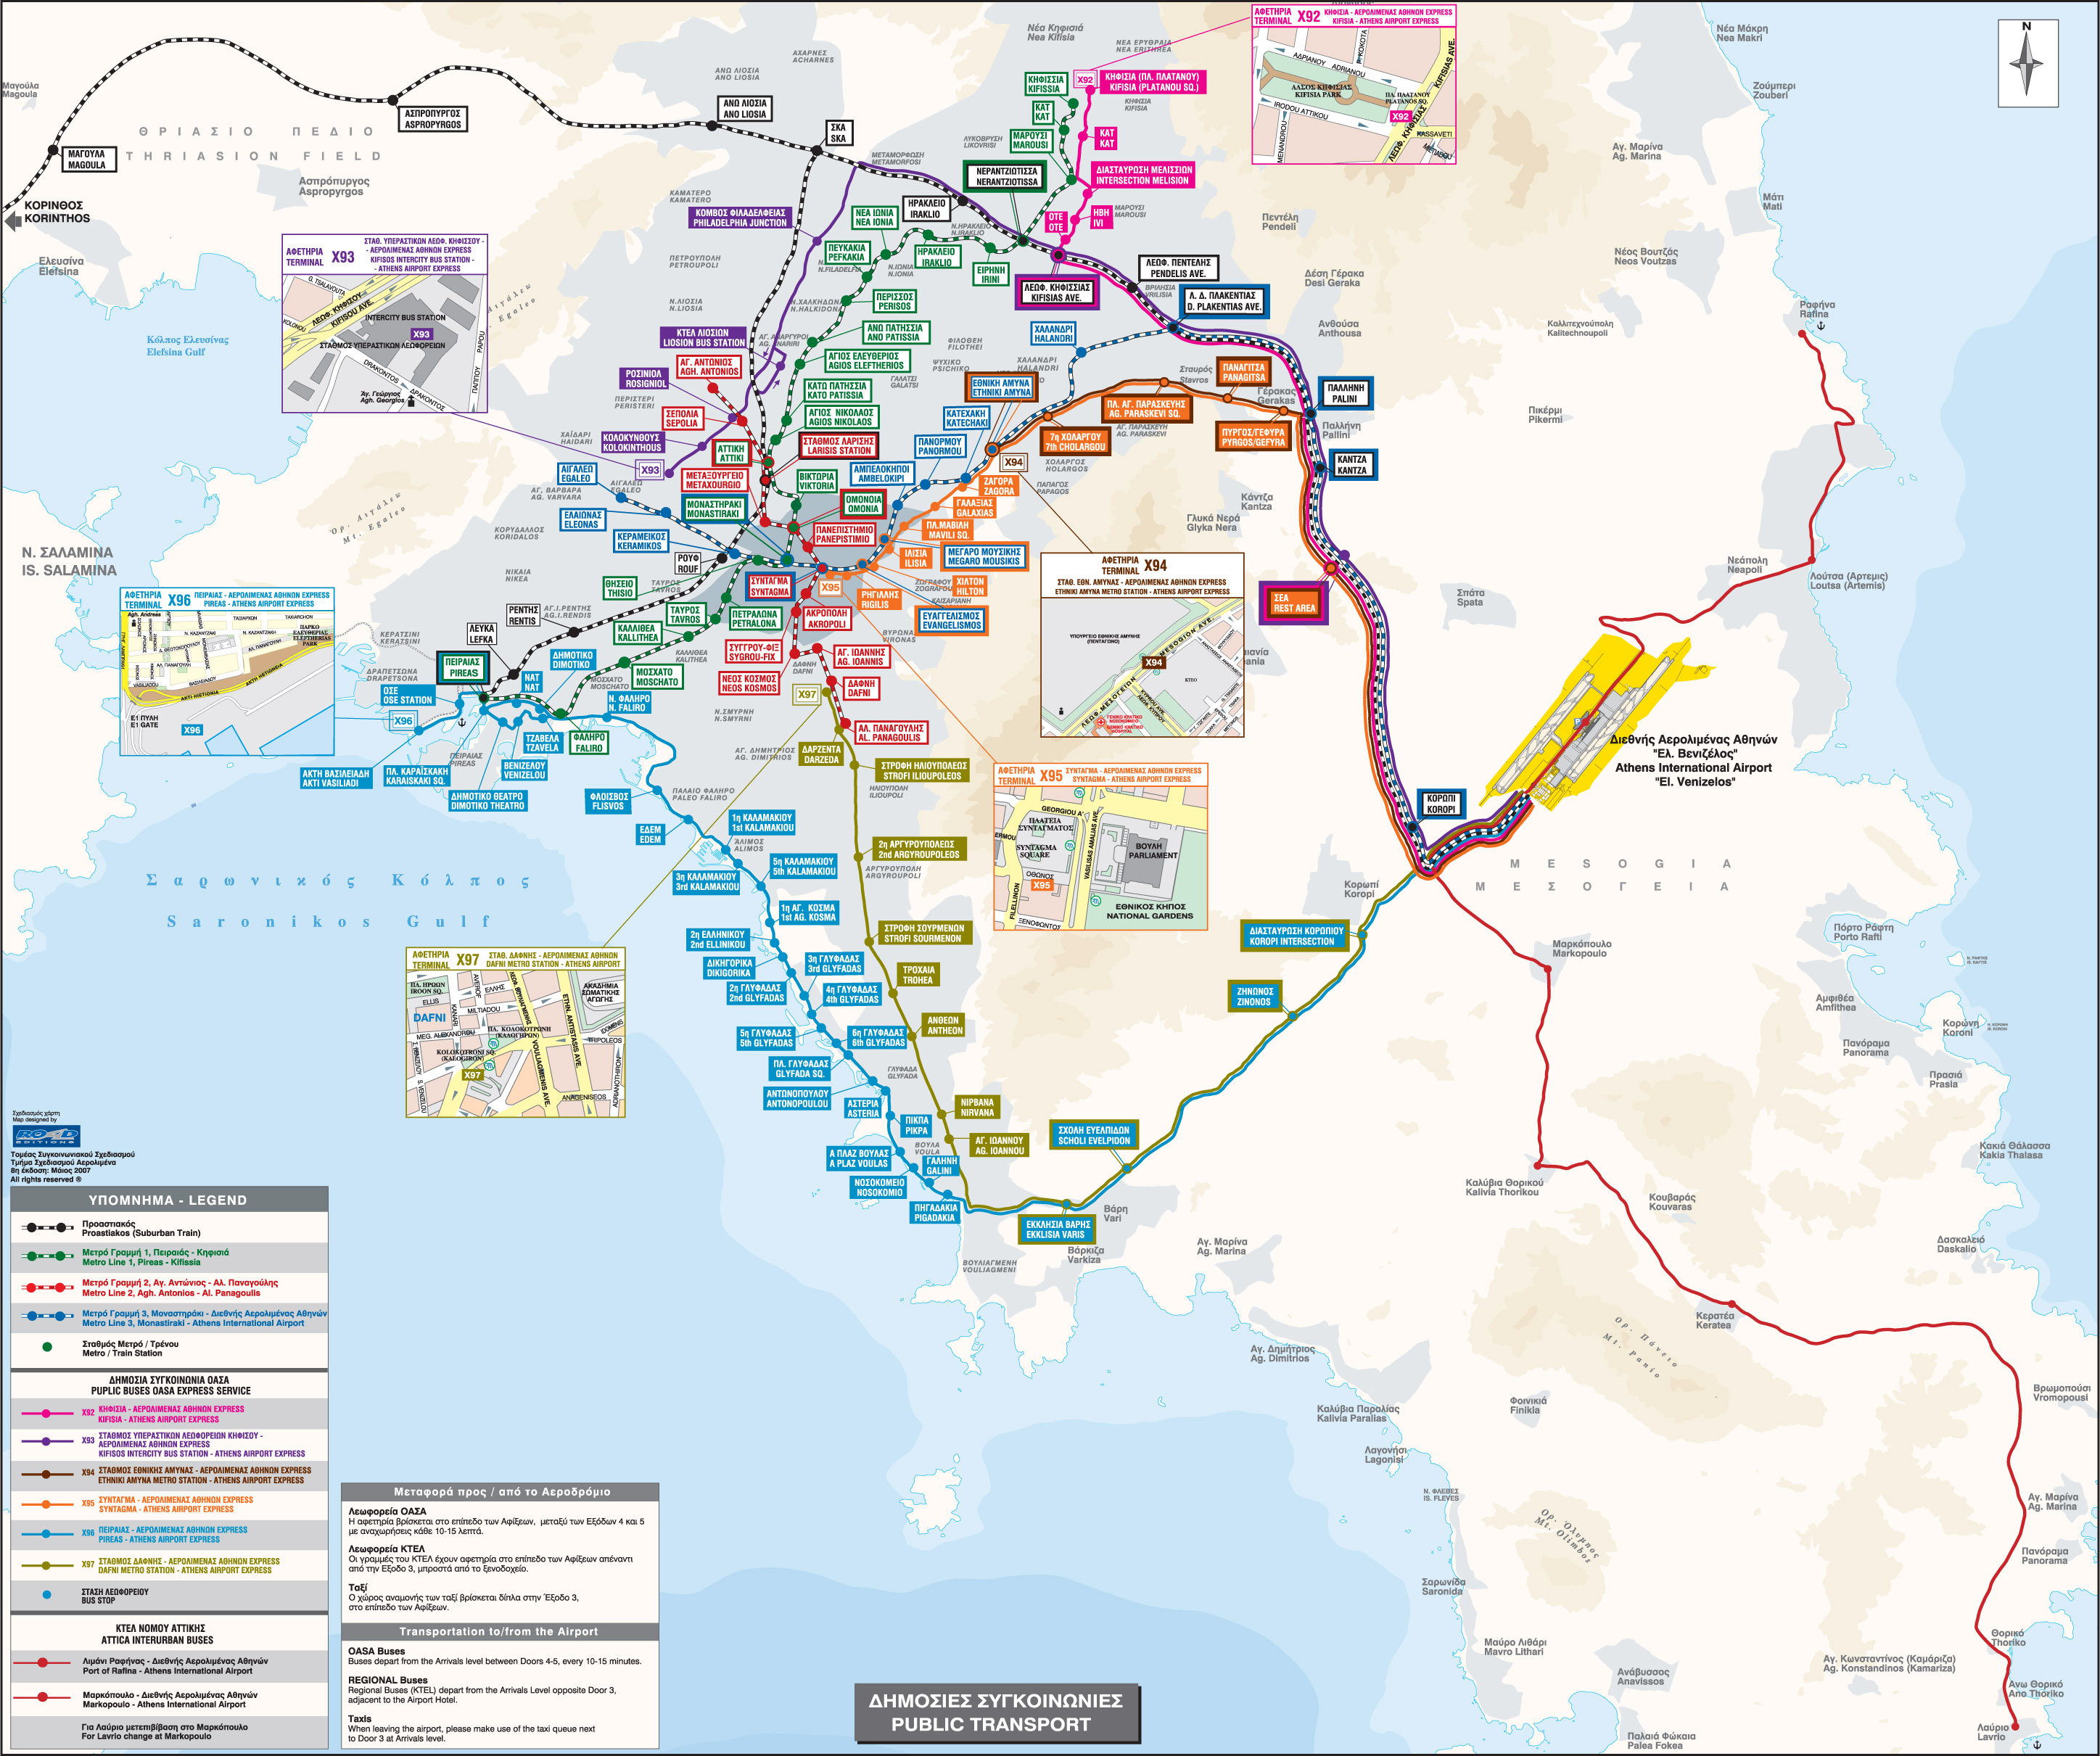 Scheme to arrive at the Athens International Airport (public transport)